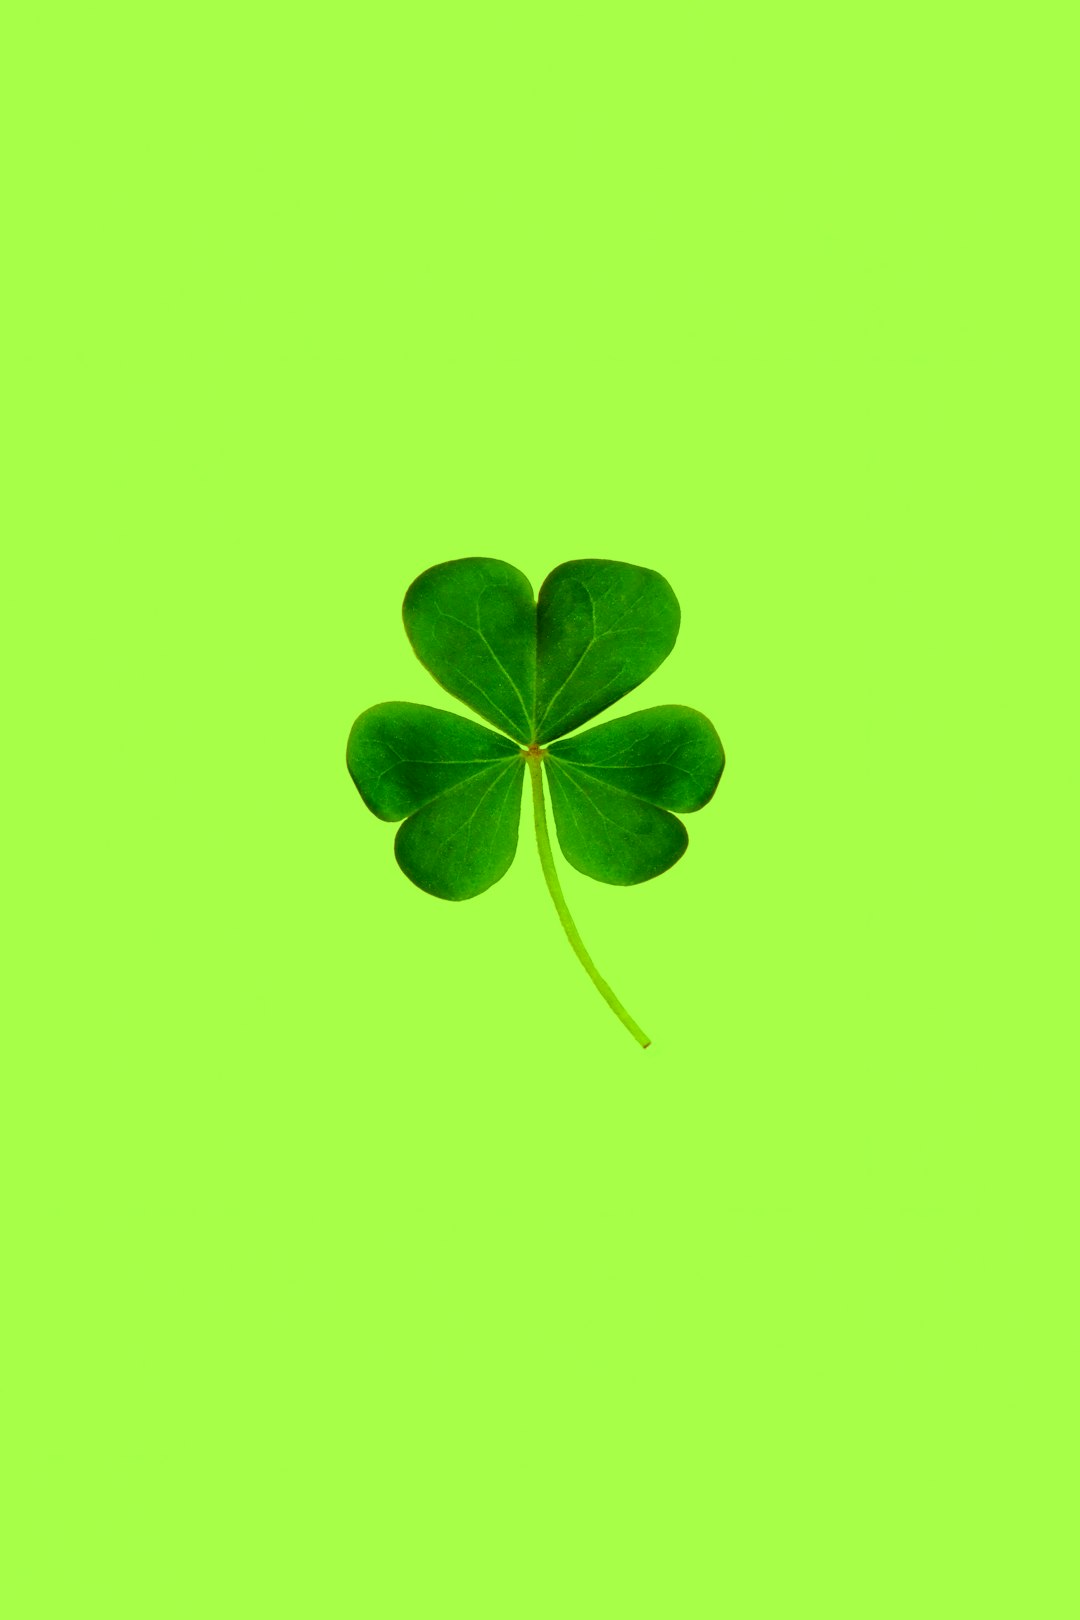 green four-leaf clover on neon green background.   It's the best of luck!